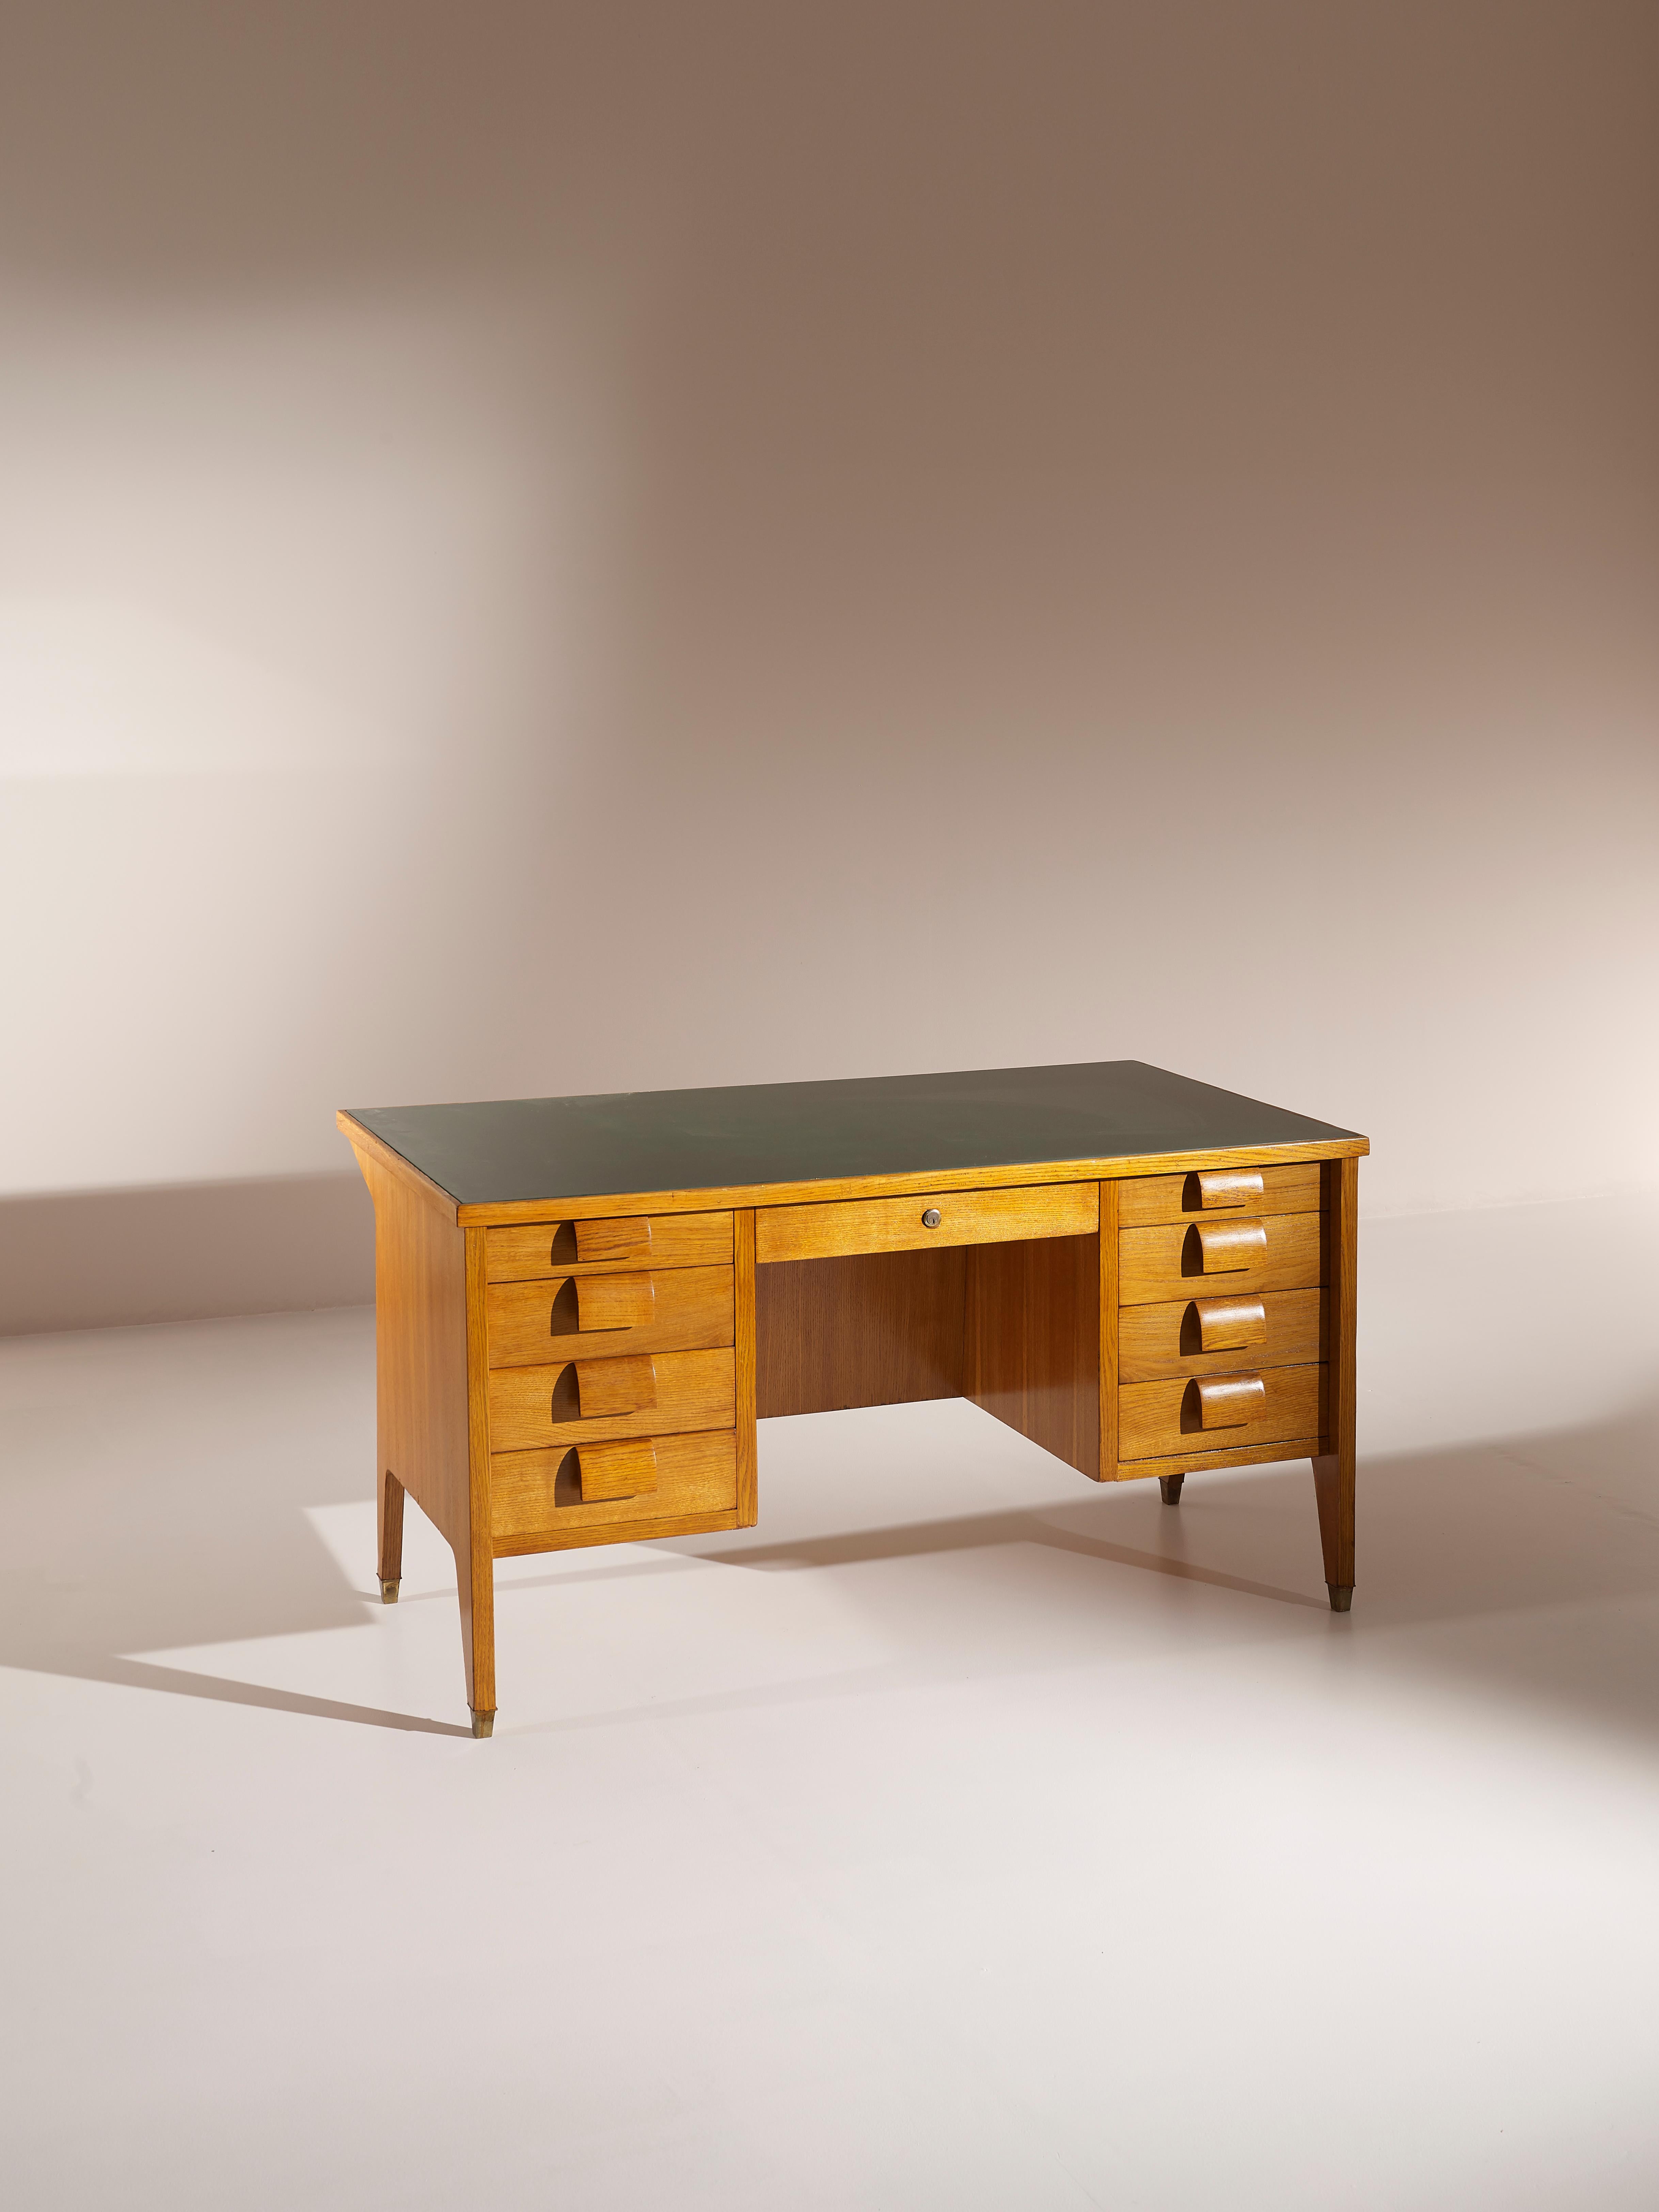 Italian Mid-Century Oak Desk Gio Ponti Inspired, with Brass Feet and Glass Top 4